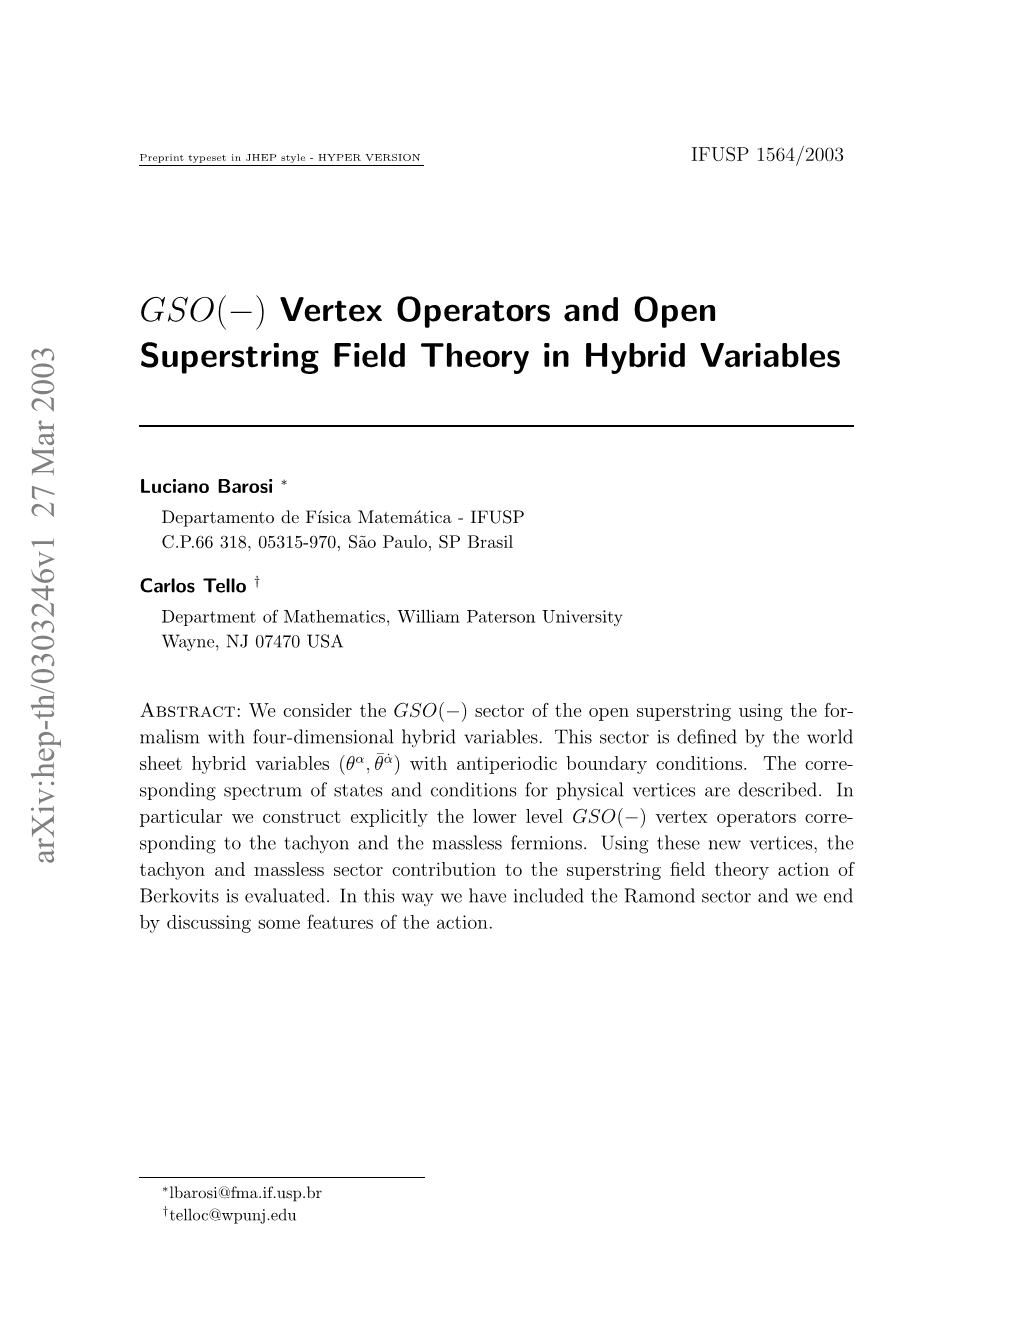 GSO (-) Vertex Operators and Open Superstring Field Theory in Hybrid